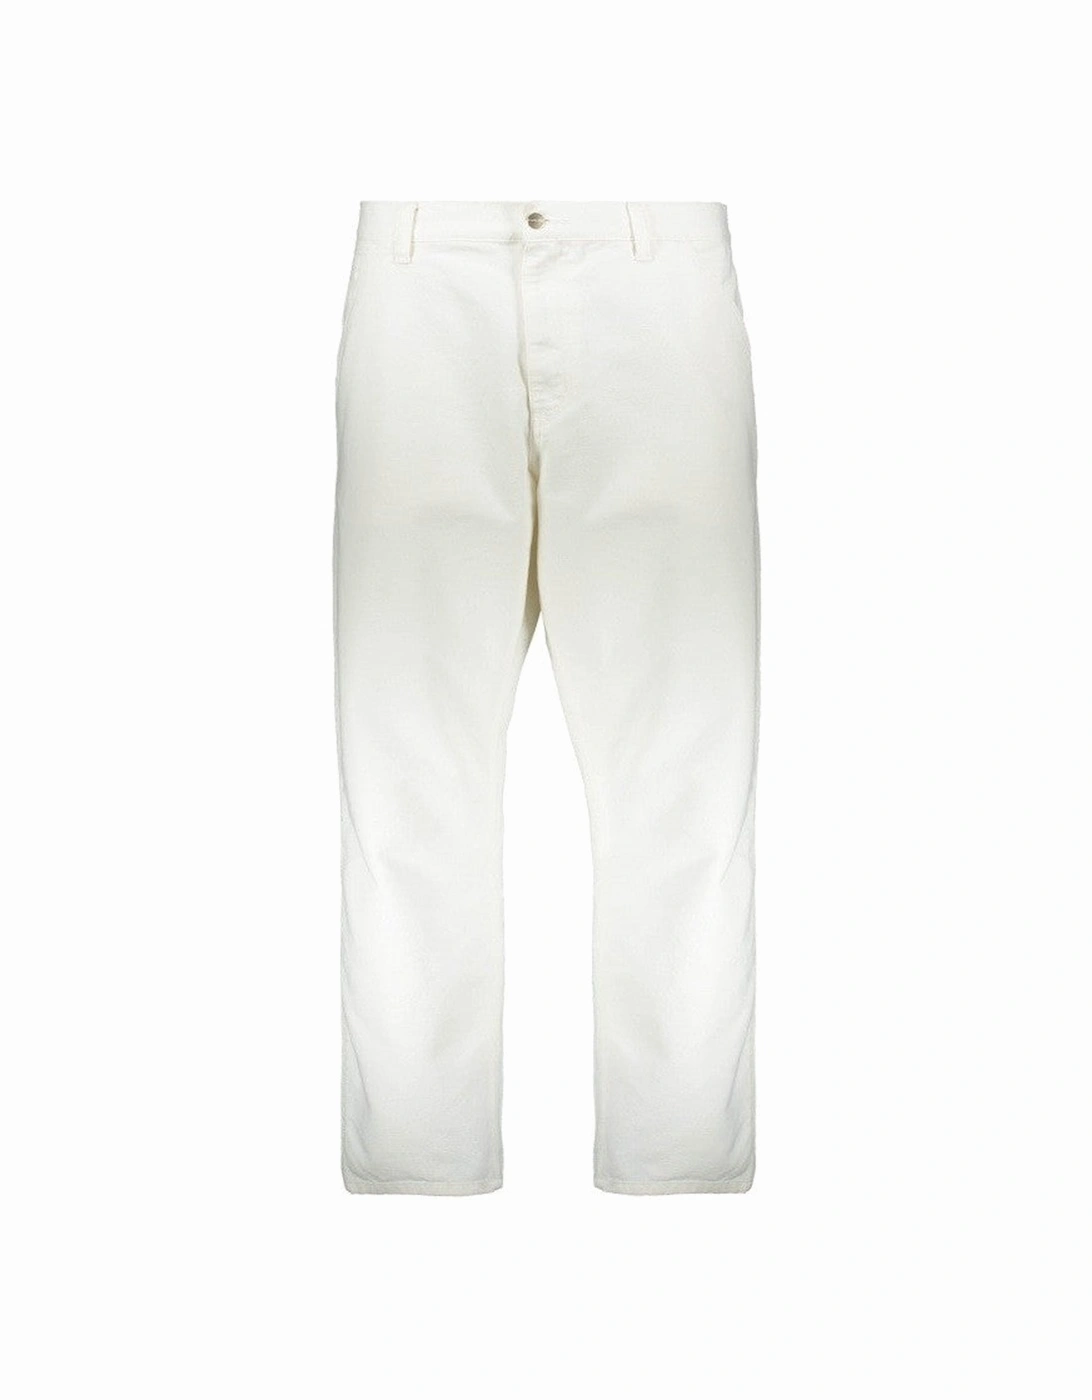 Carhartt dearborn canvas trousers - Off white, 4 of 3